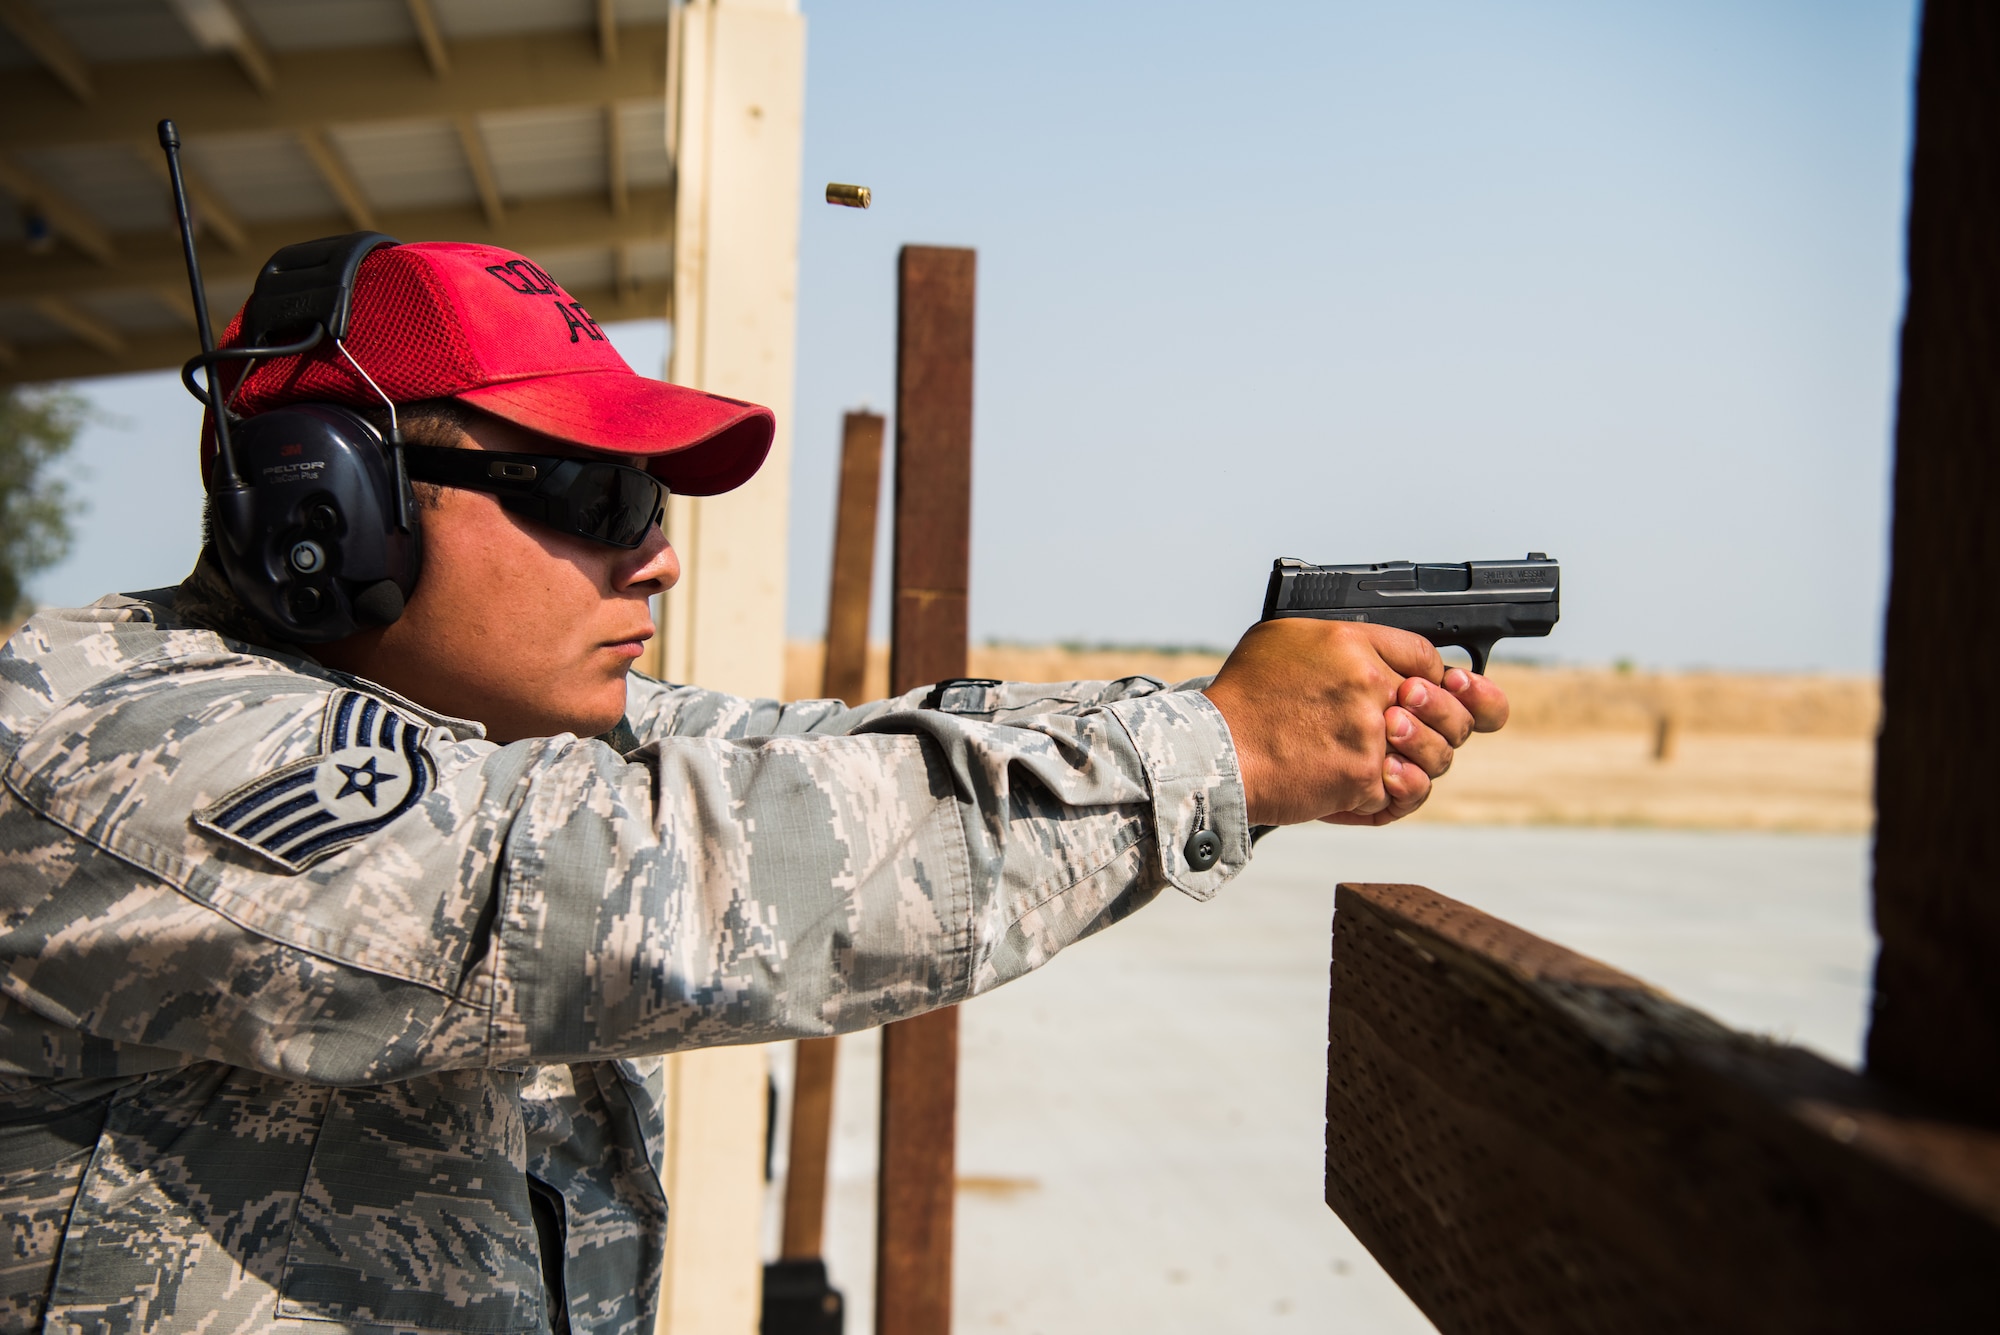 Staff Sgt. Jude Mares, 9th Security Forces combat arms training and maintenance instructor, discharges his fire arm during a training course meant to help instructors to stray proficient with weapon systems at Beale Air Force Base, California, July 31, 2018 . CATM instructors are trained at Joint Base San Antonio-Lackland, Texas and are recertified on an annual basis by their shops NCOIC. (U.S. Air Force photo by Senior Airman Justin Parsons)